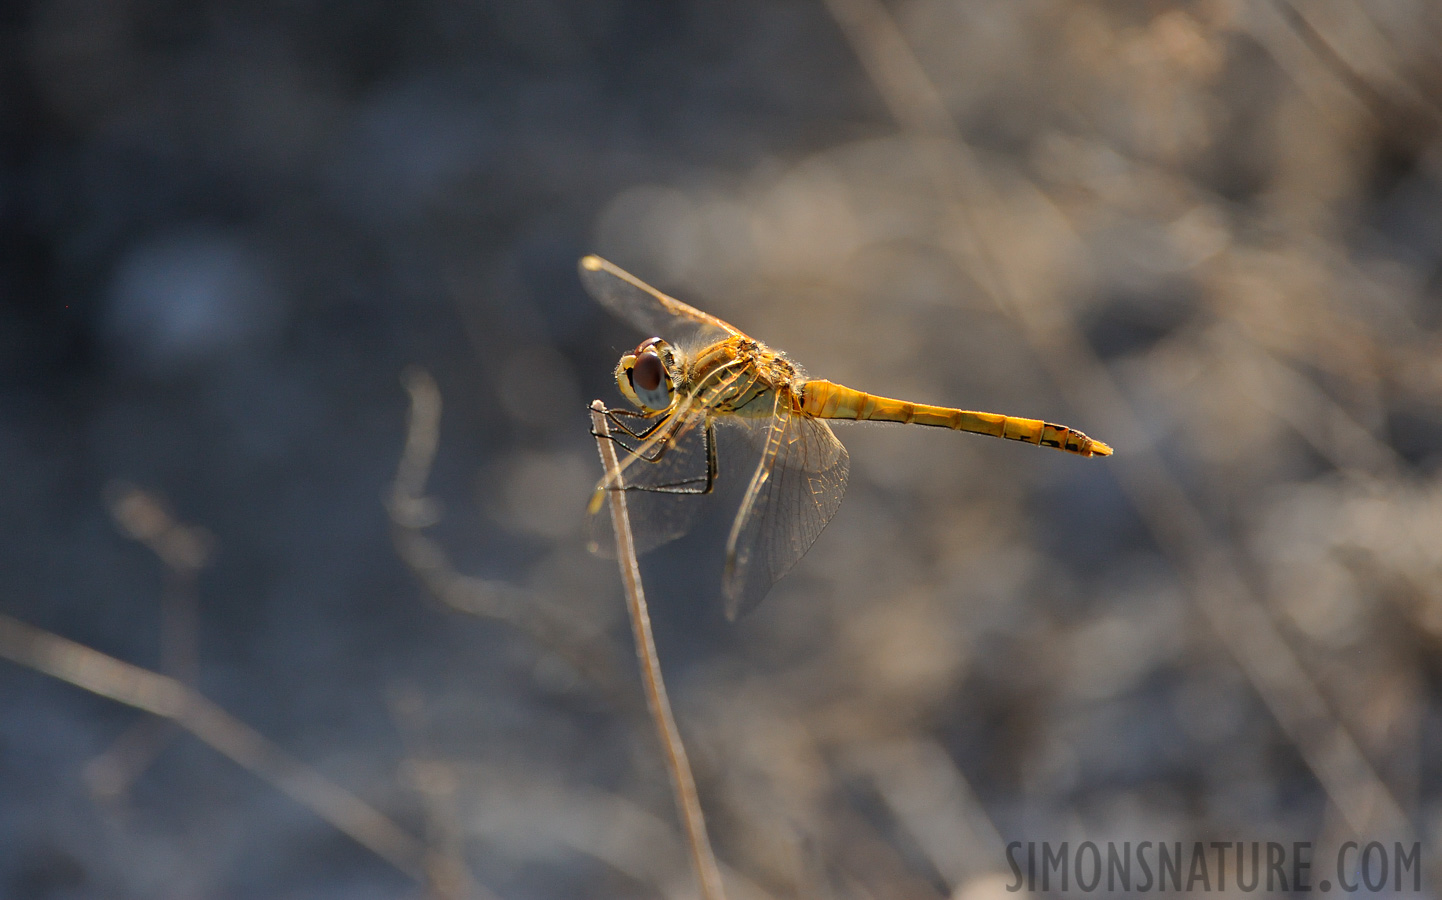 Sympetrum fonscolombii [550 mm, 1/1250 sec at f / 7.1, ISO 1600]